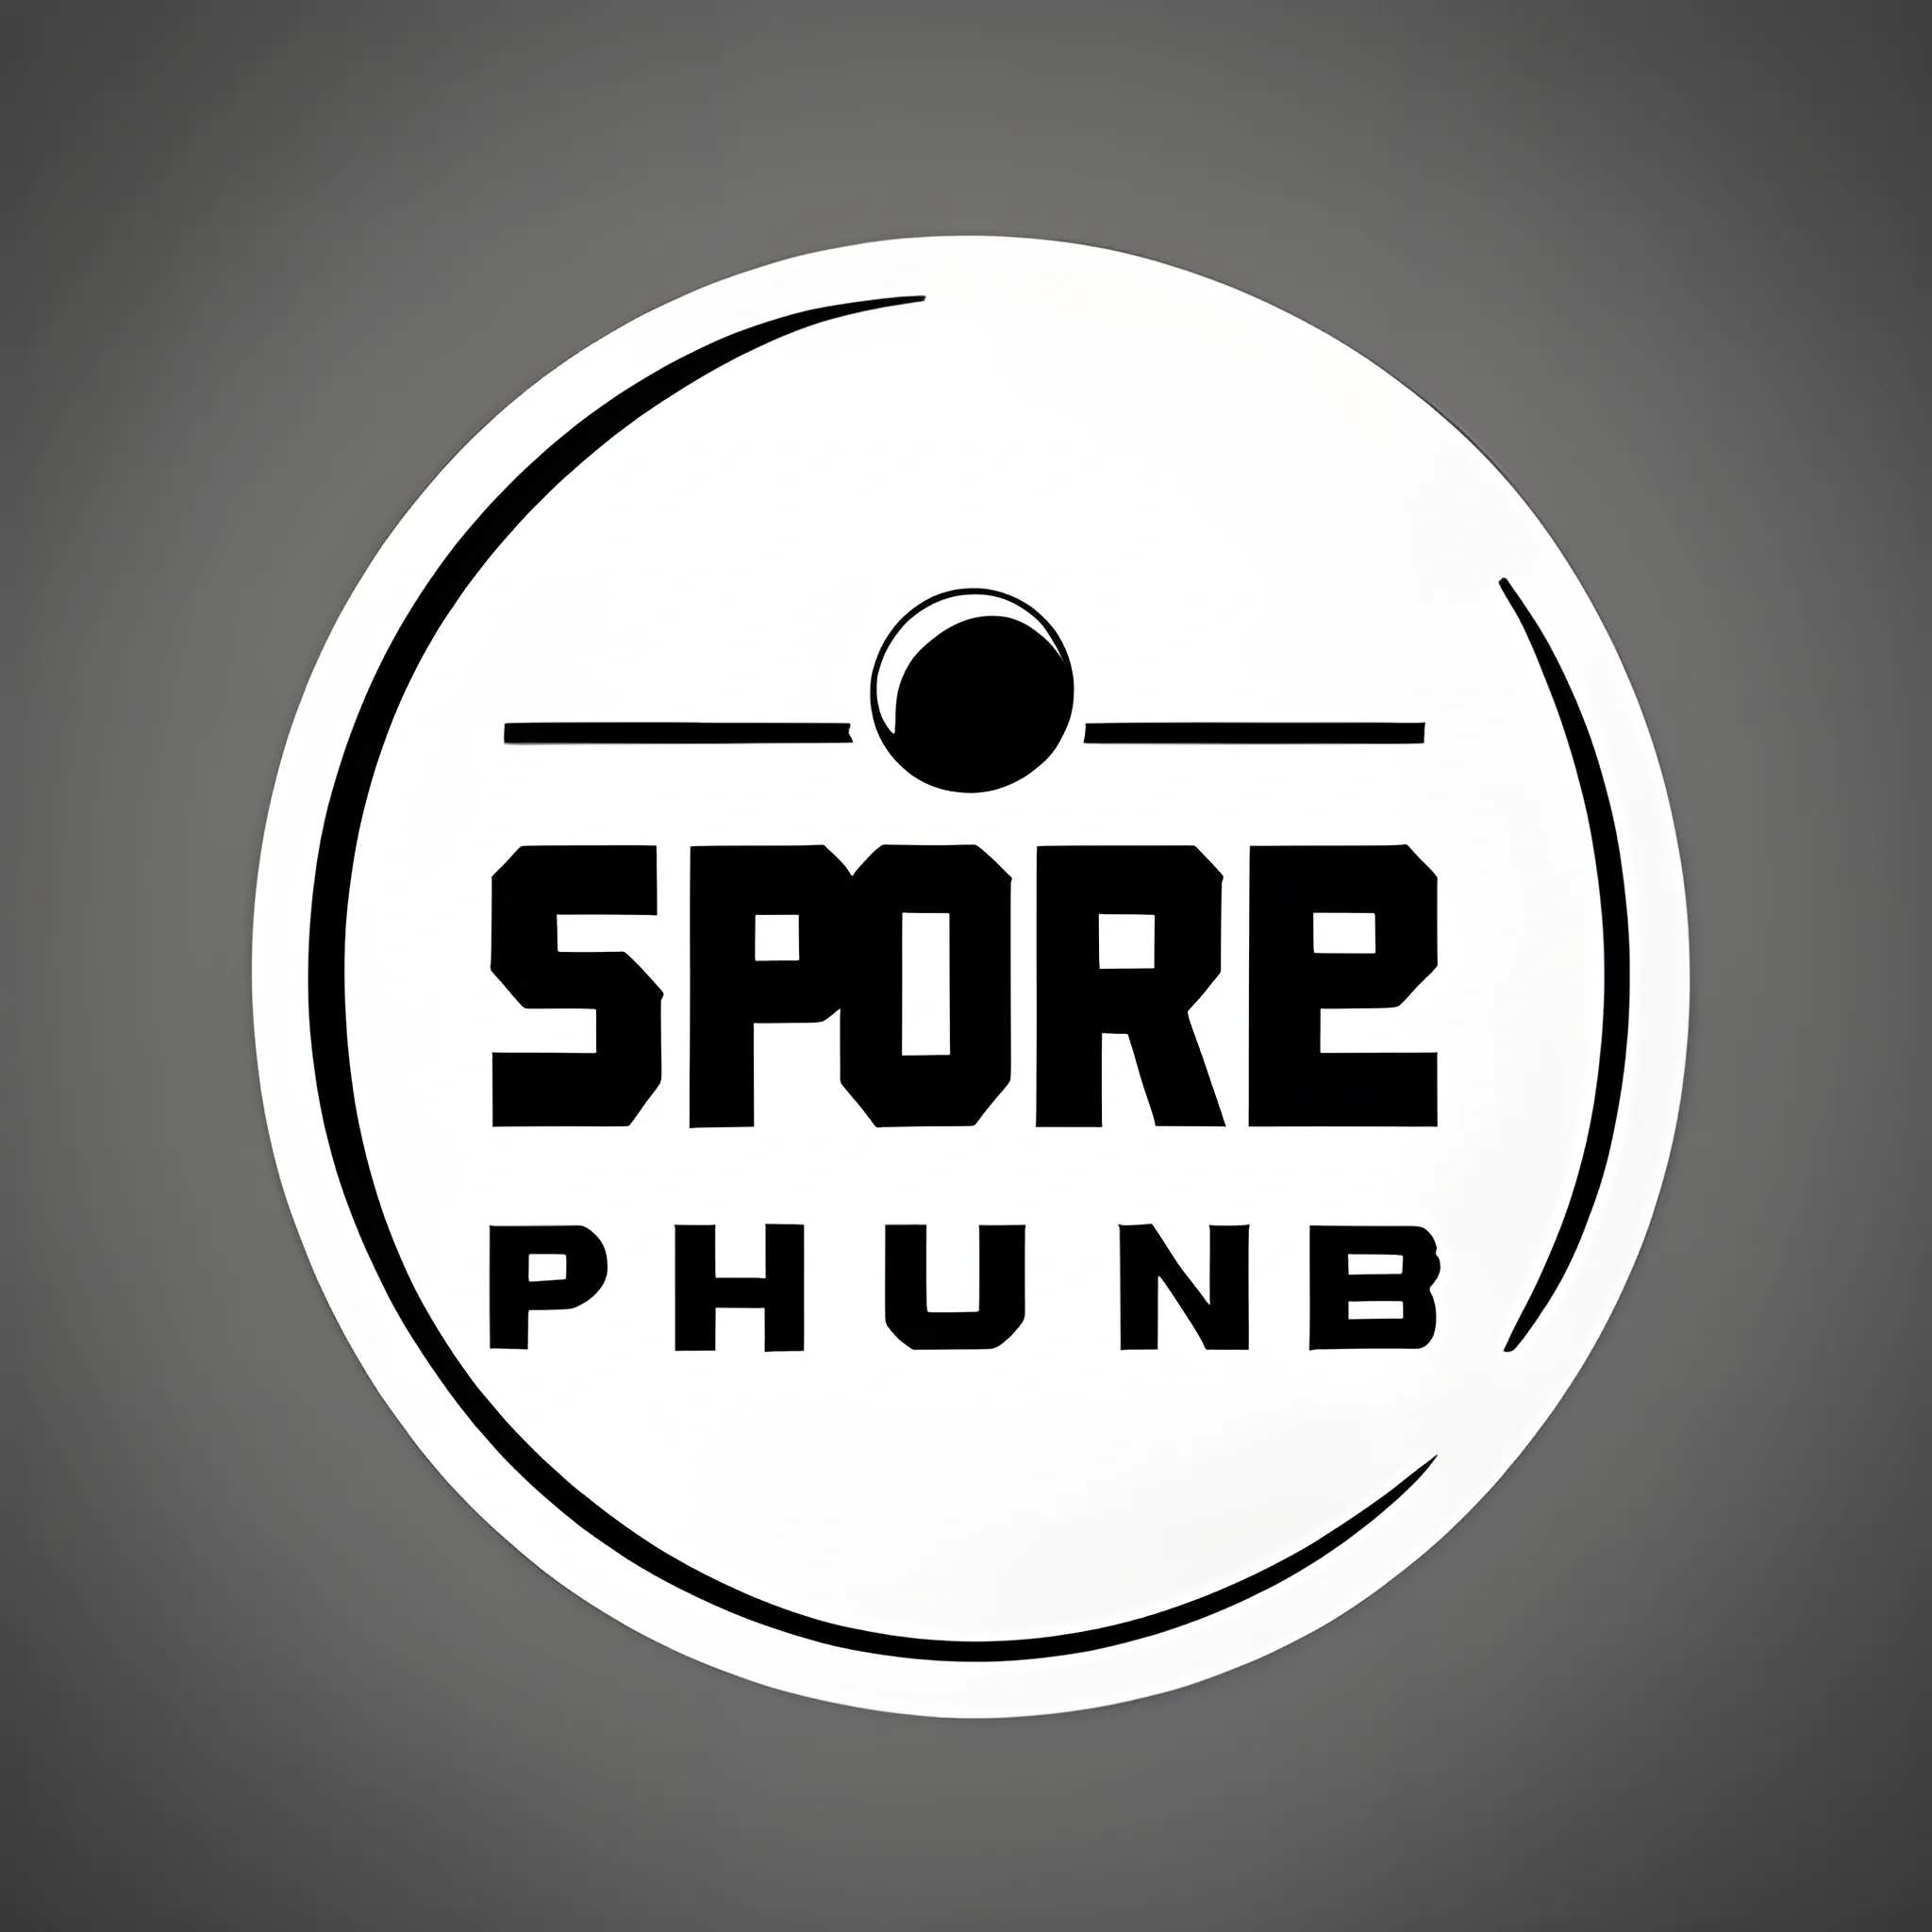 Make a vector logo for a sports printing shop. Name of the shop is Planet printing hub.